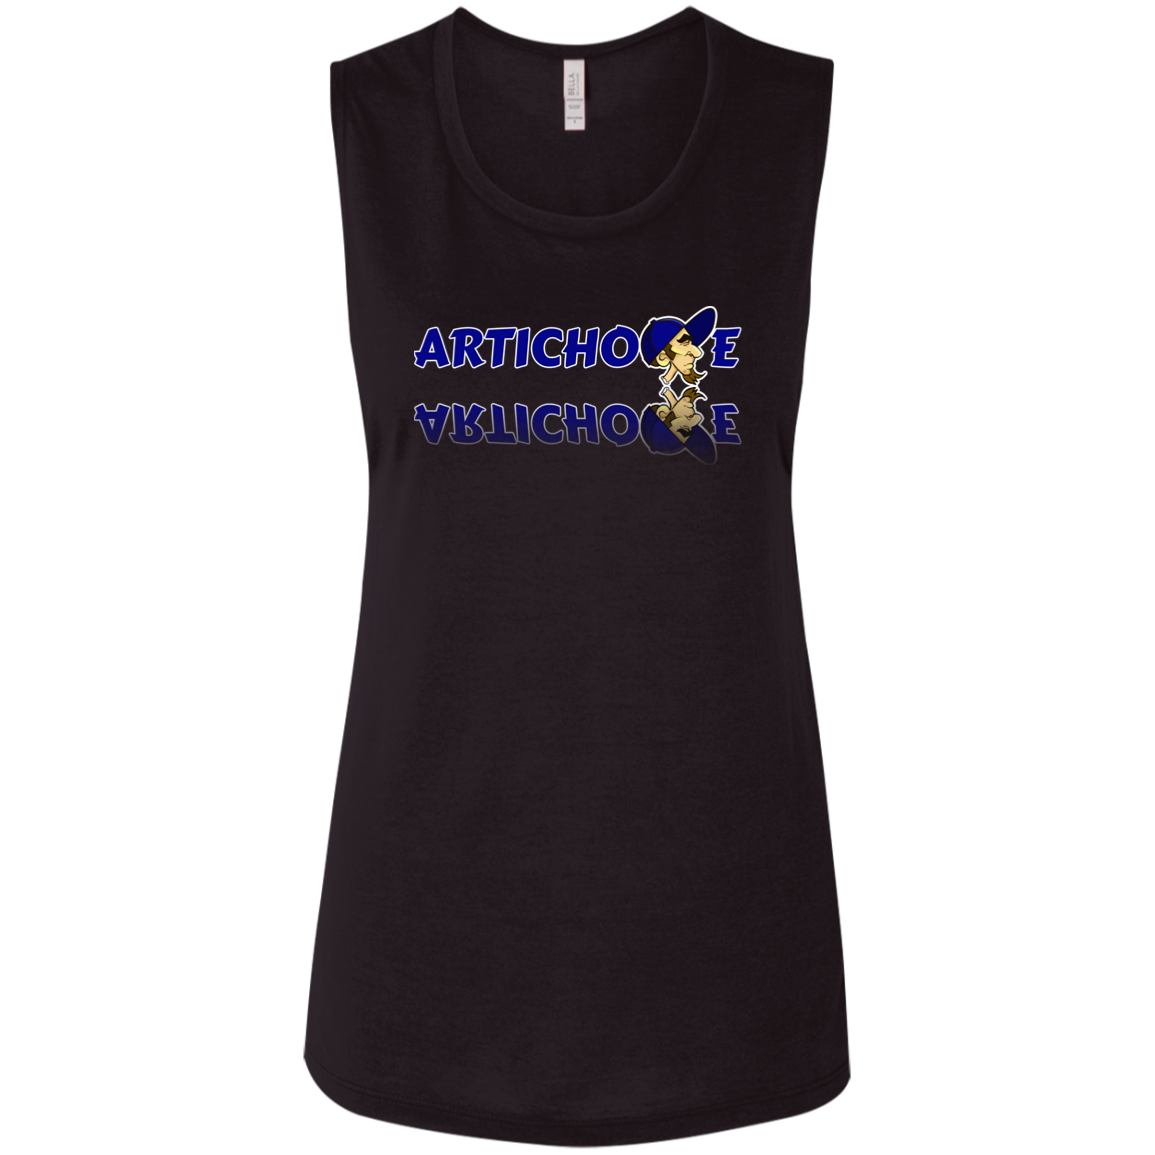 ZZ#20 ArtichokeUSA Characters and Fonts. "Clem" Let’s Create Your Own Design Today. Ladies' Flowy Muscle Tank